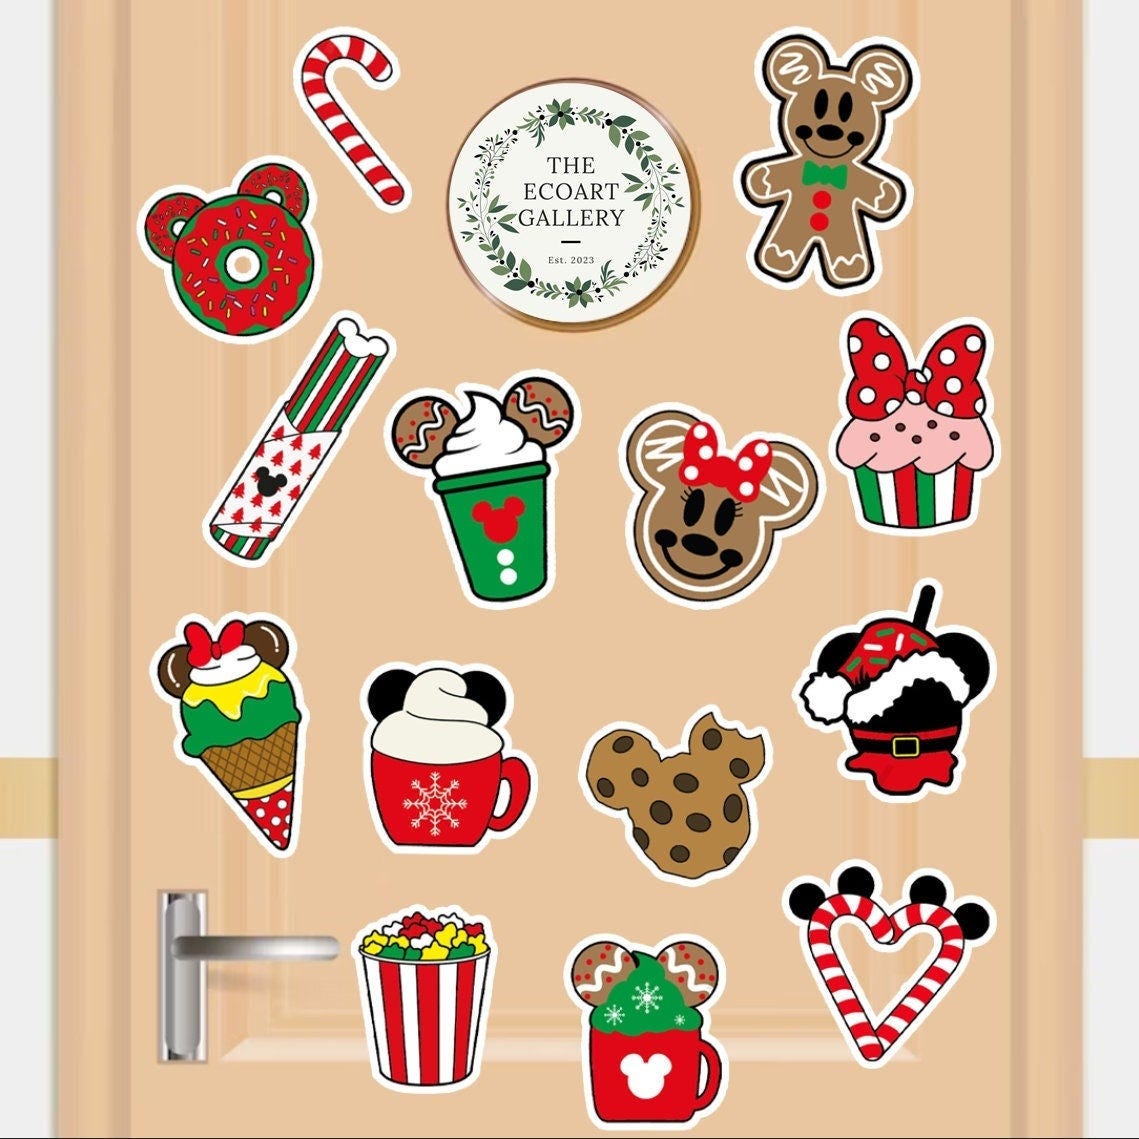 Disney Christmas Snacks Drinks Very Merrytime Cruise Magnet, Mickey Minnie Gingerbread Cookie Family Magnet For Cruise Ship Stateroom Door